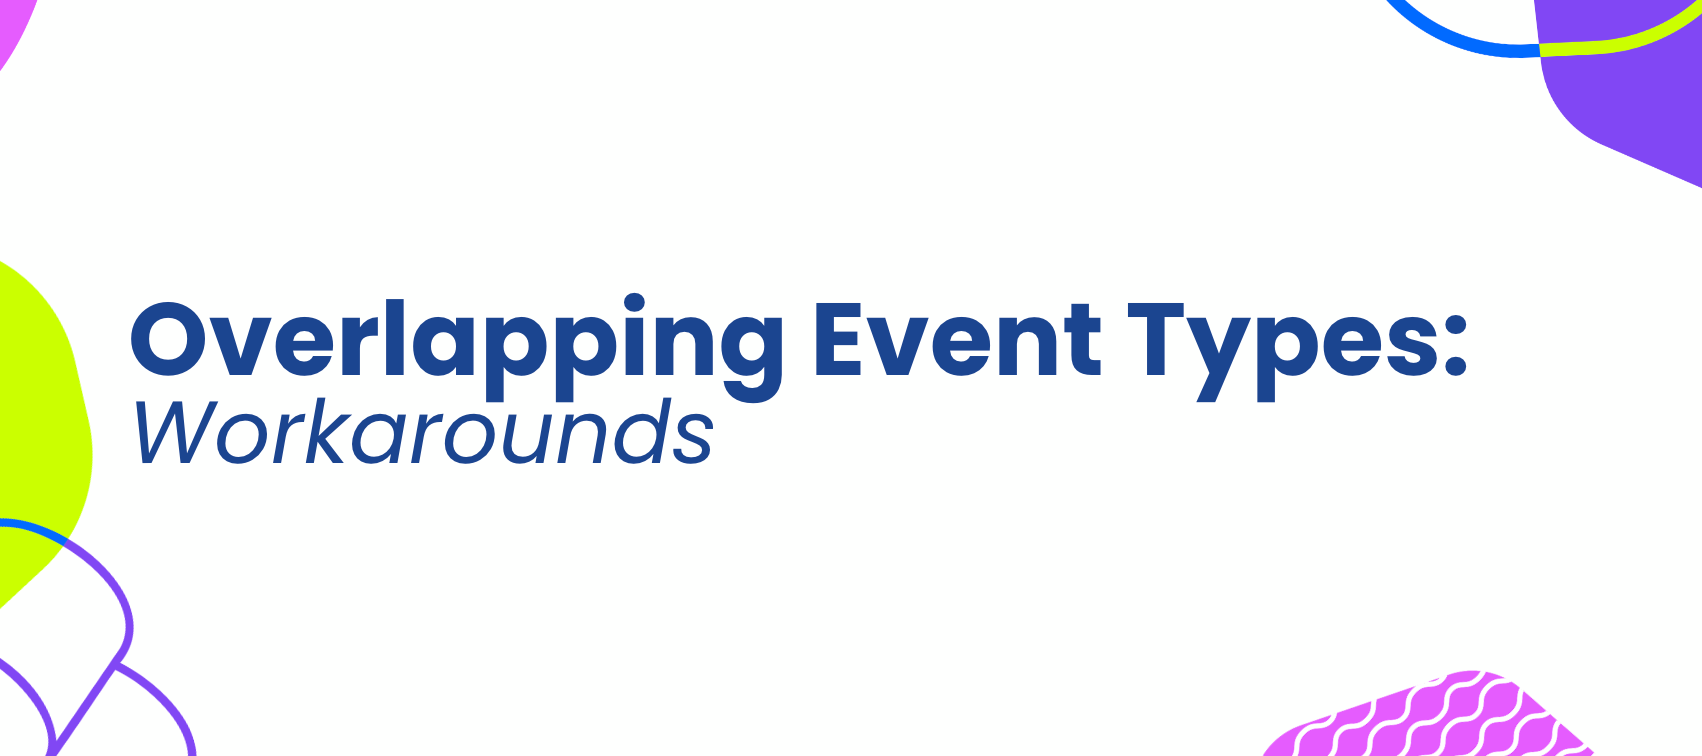 Overlapping Event Types: Workarounds